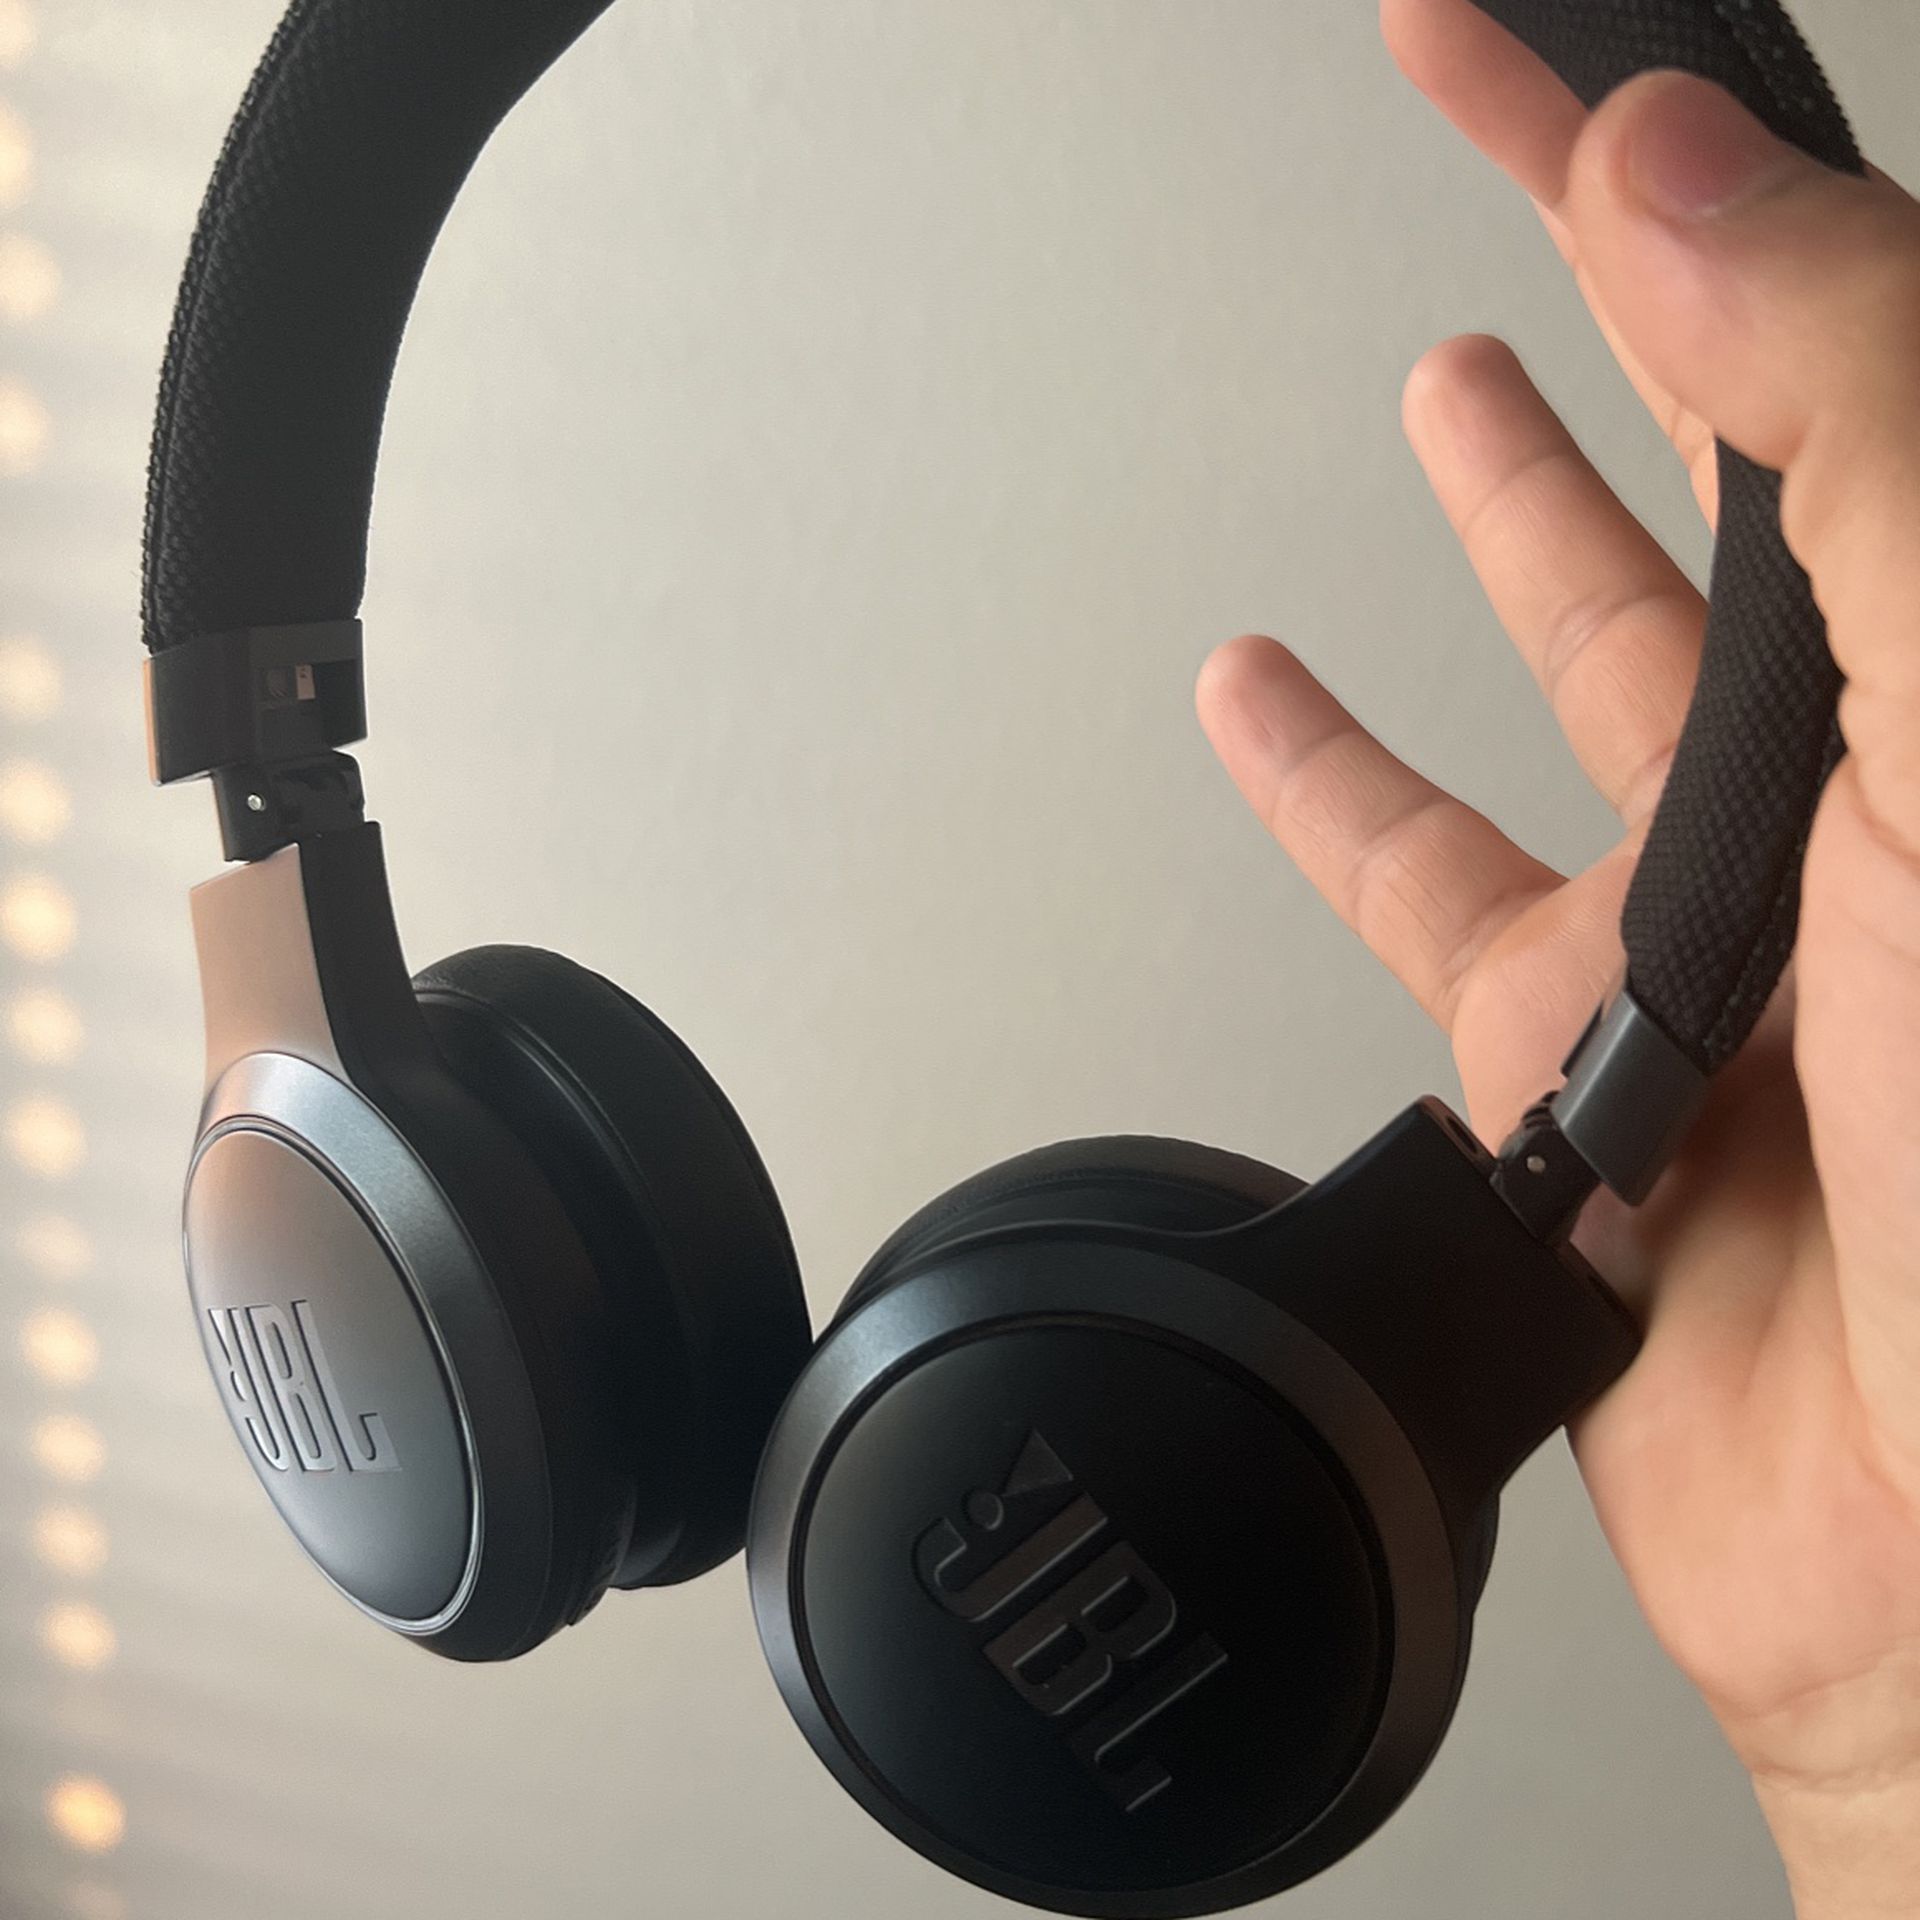 JBL LIVE 460NC on-ear headphones offer up to 50 hours of battery life »  Gadget Flow